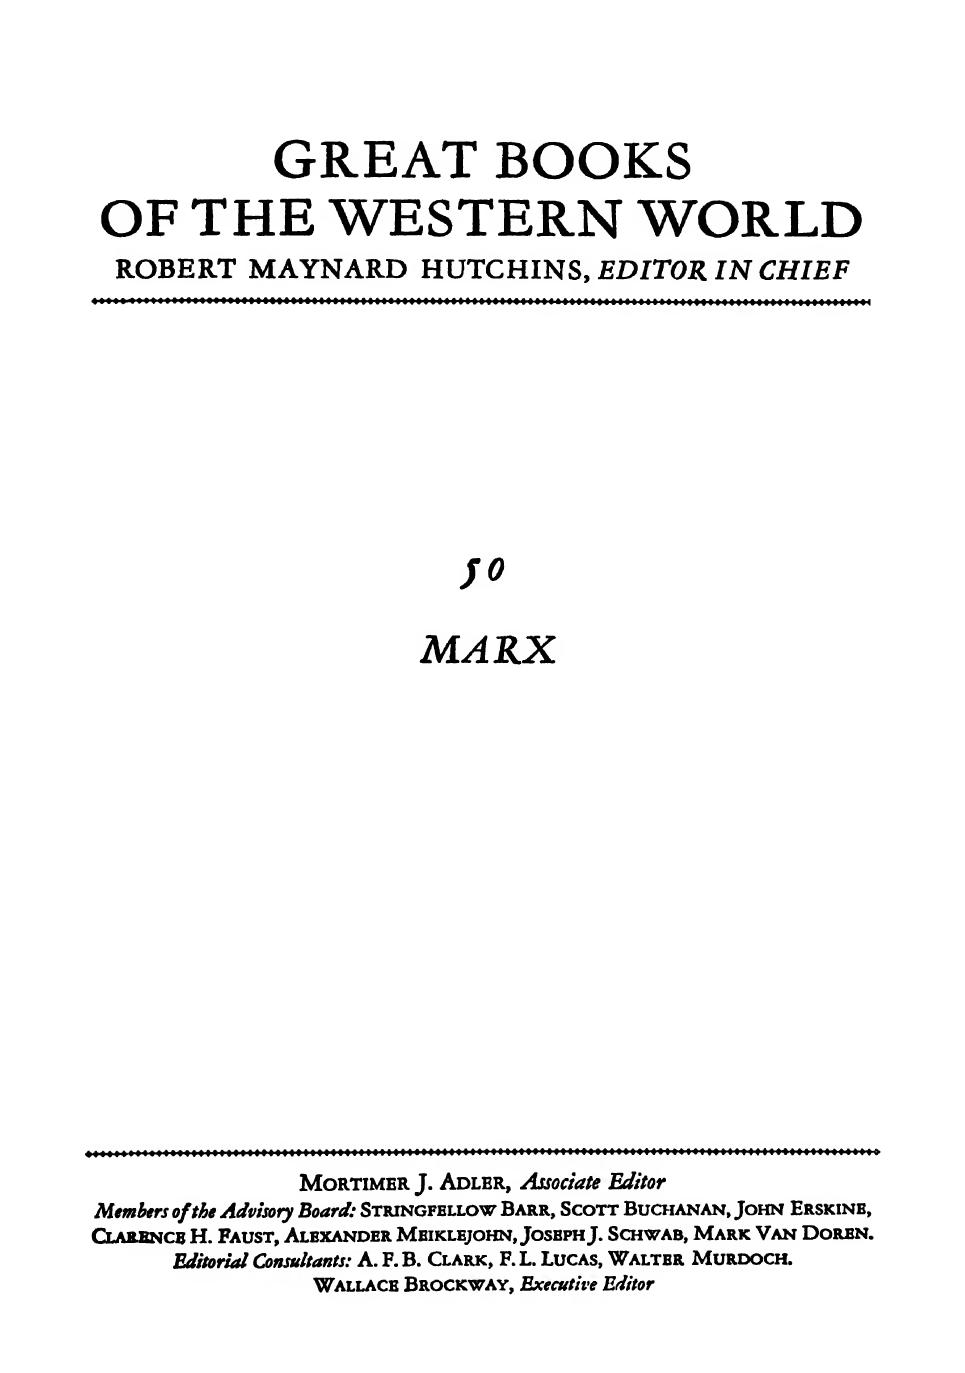 Great books of the Western World - Volume 50